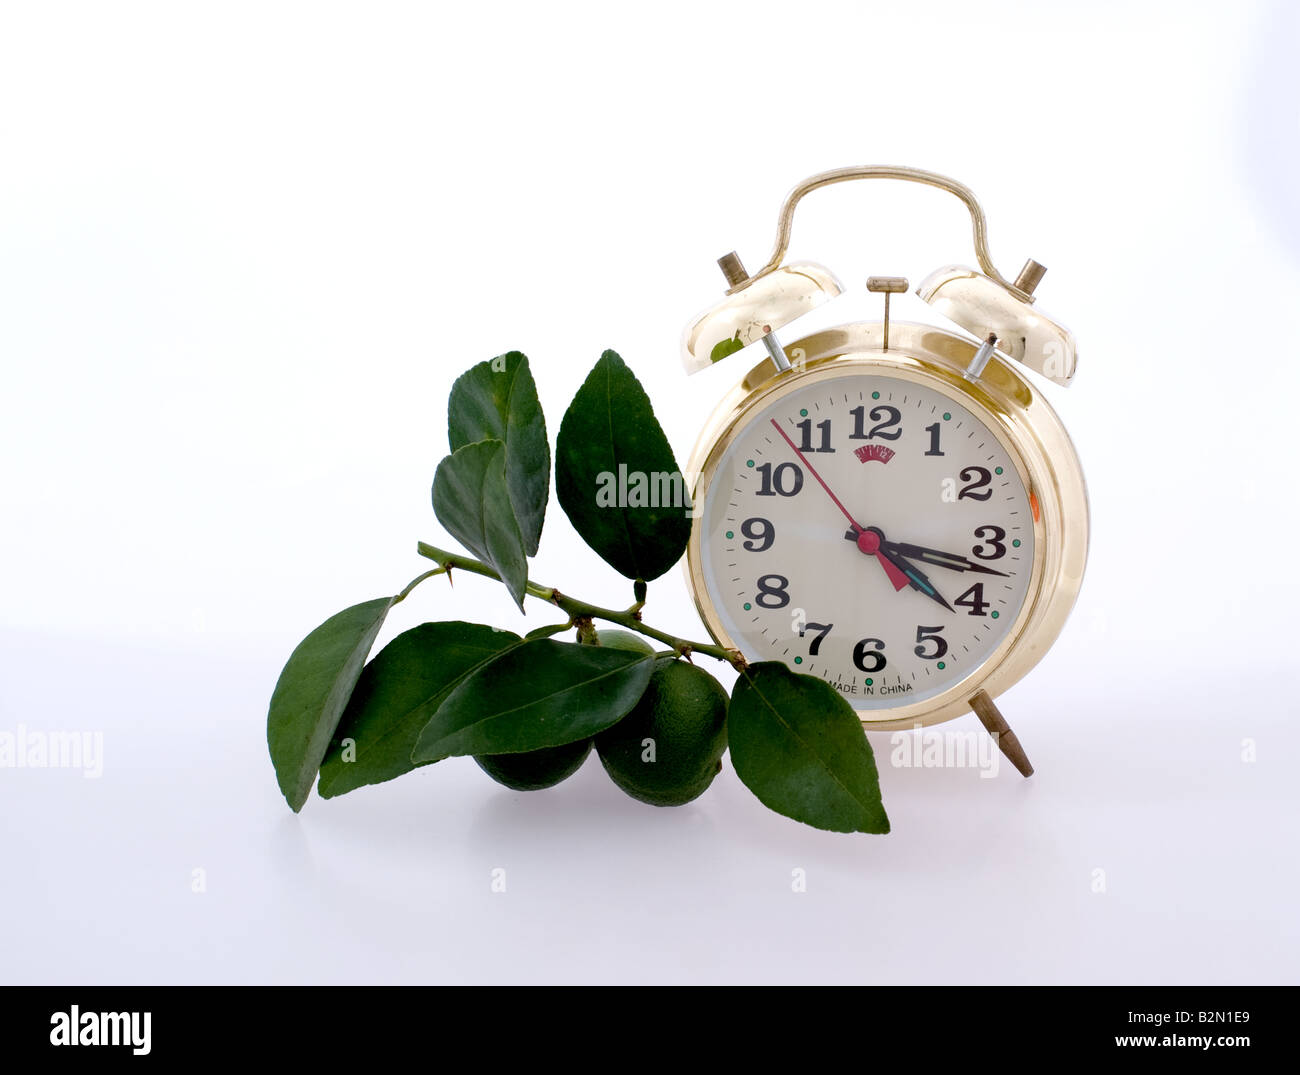 Old style alarm clock next to a keylime branch with new fruit Stock Photo